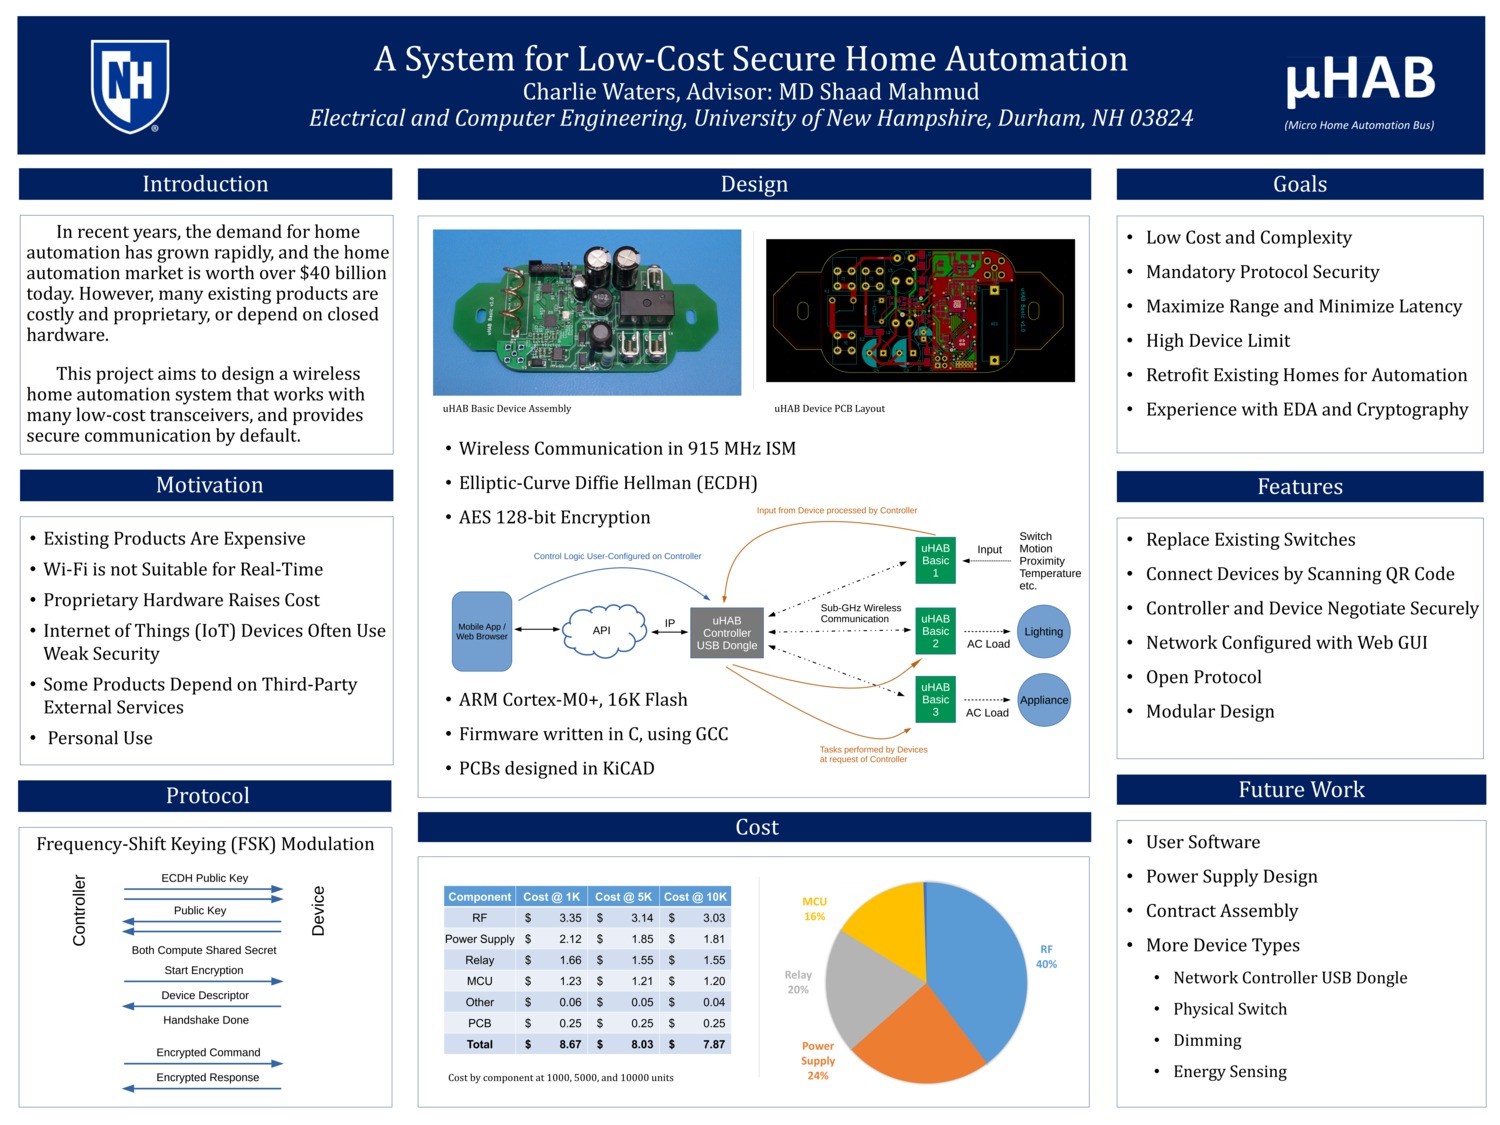 A System For Low-Cost Secure Home Automation by caw2009